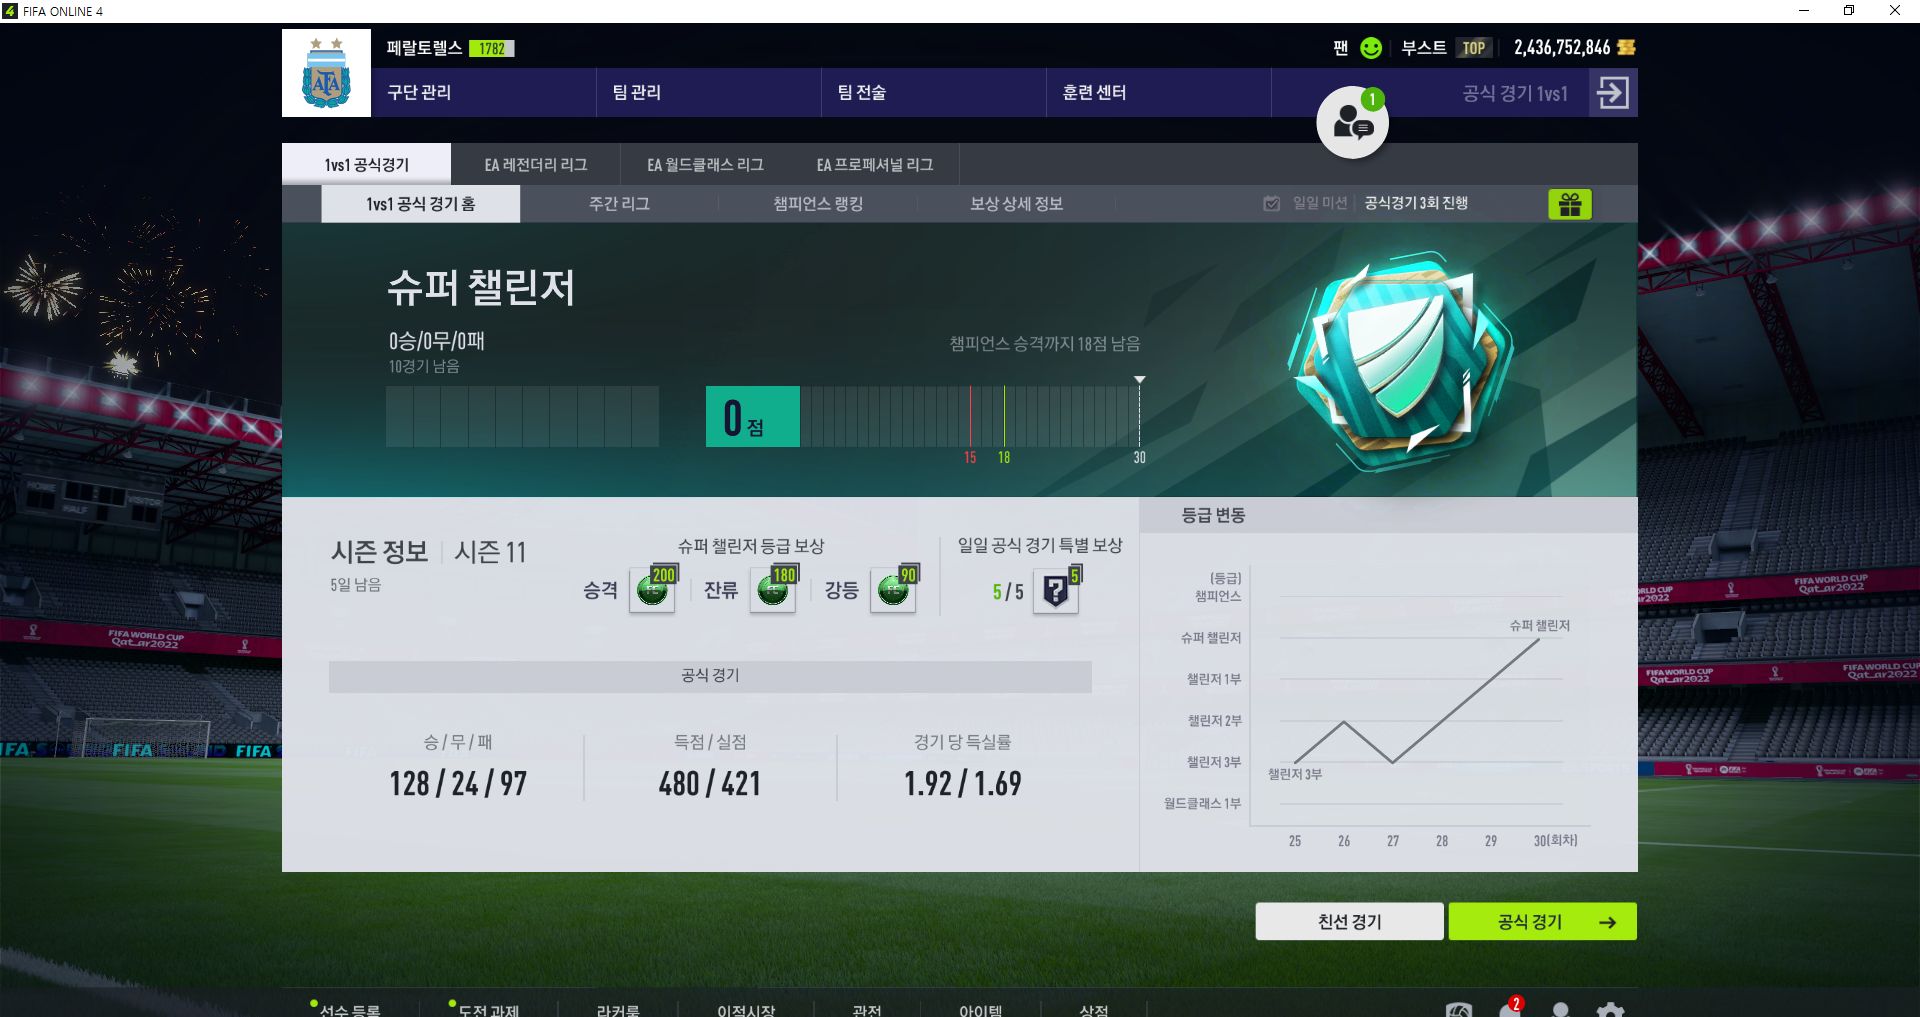 FIFA ONLINE 4 2022-12-02 오후 10_32_10.png